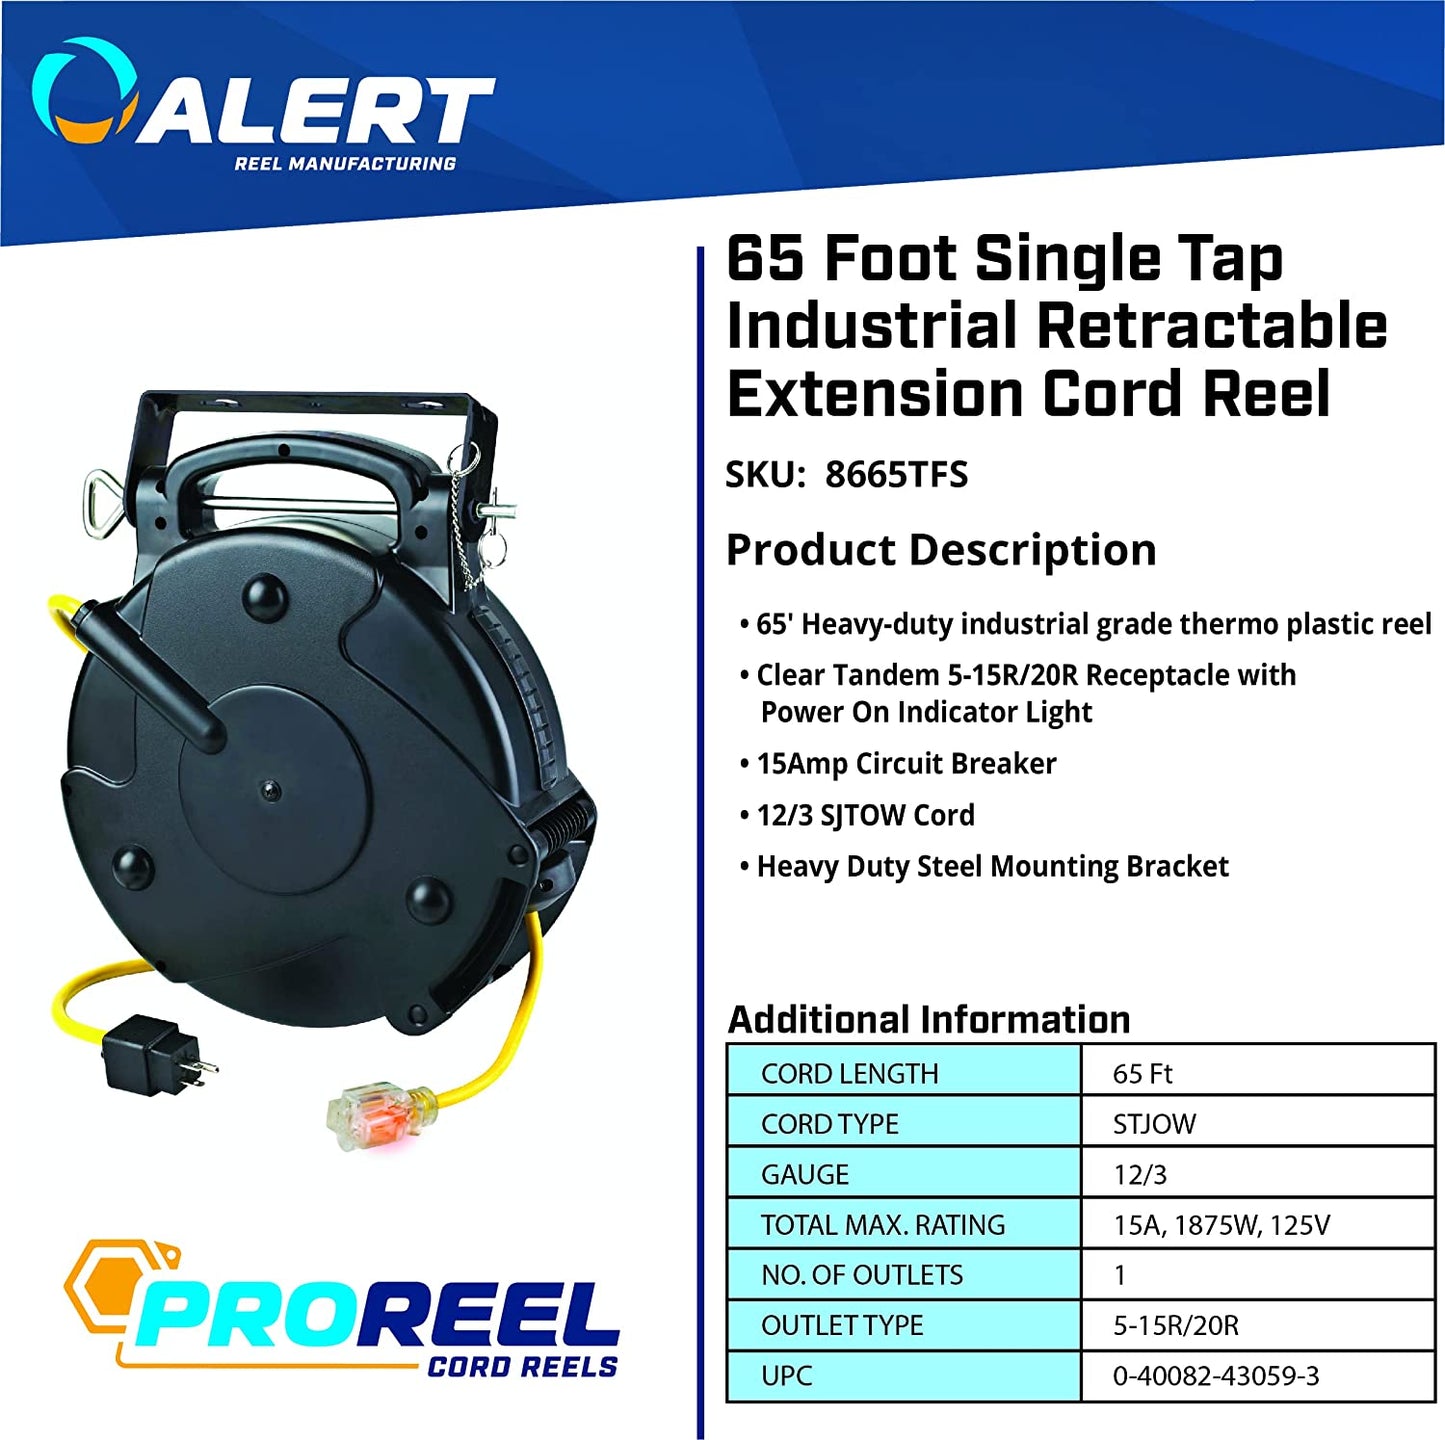 Alert Stamping Industrial Retractable Extension Cord Reel - E.S.N Tools